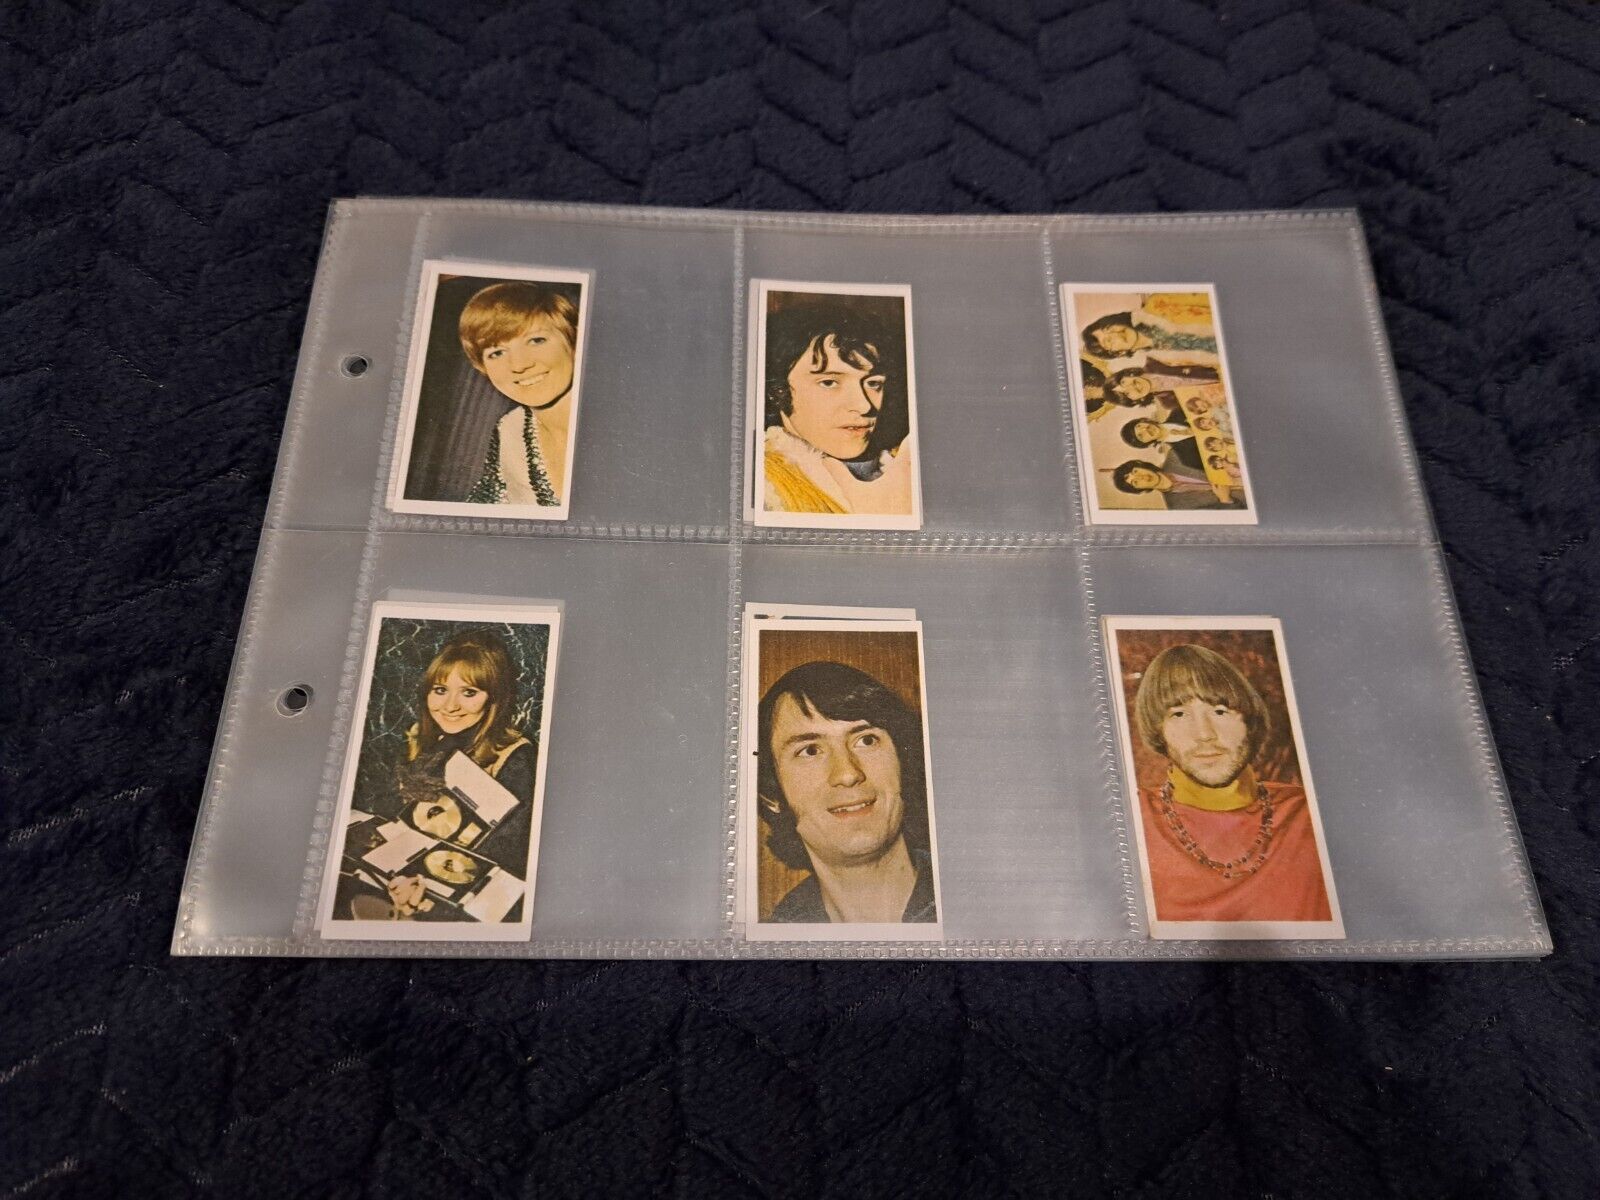 Lyons Maid 1969 pop stars music cards full set 40 great condition beatles stones